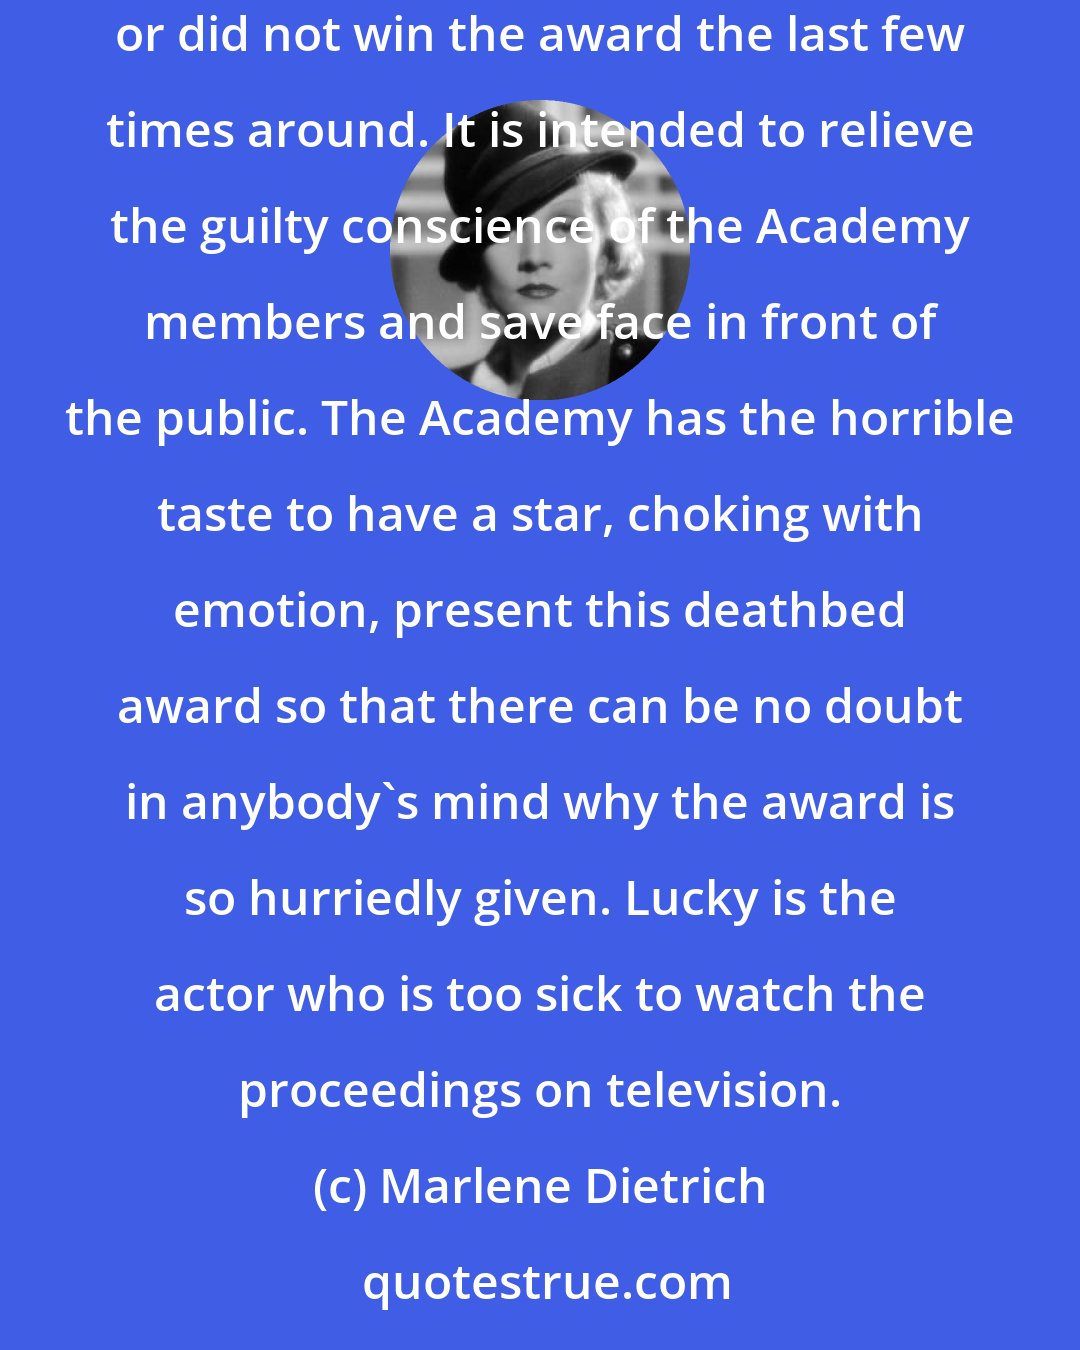 Marlene Dietrich: A new kind of award has been added -- the deathbed award. It is not an award of any kind. Either the recipient has not acted at all, or was not nominated, or did not win the award the last few times around. It is intended to relieve the guilty conscience of the Academy members and save face in front of the public. The Academy has the horrible taste to have a star, choking with emotion, present this deathbed award so that there can be no doubt in anybody's mind why the award is so hurriedly given. Lucky is the actor who is too sick to watch the proceedings on television.